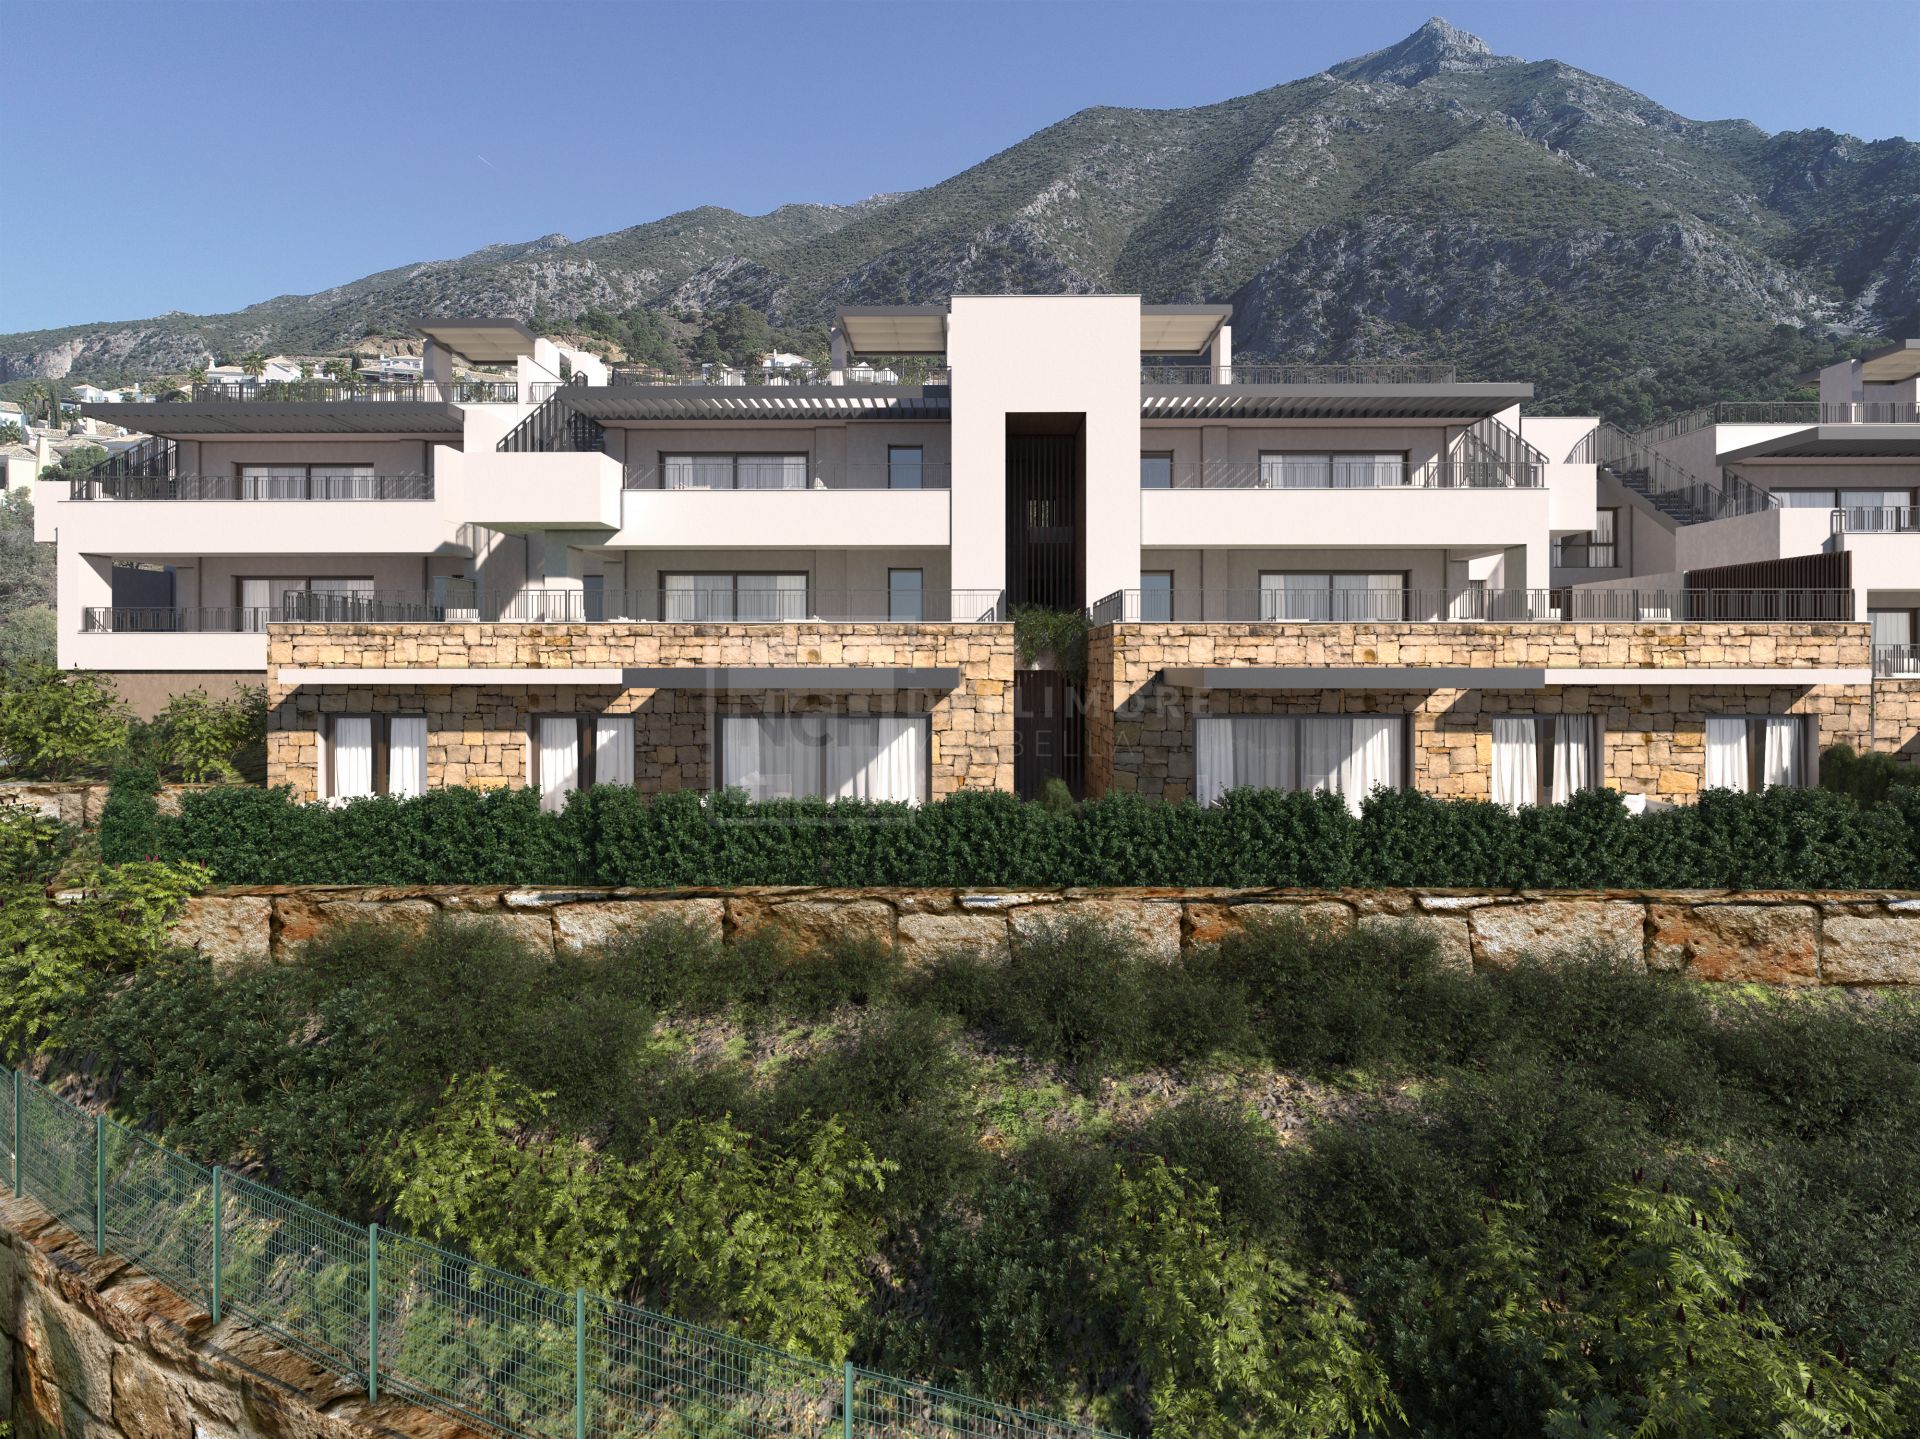 STUNNING NEW 3-BEDROOM DUPLEX PENTHOUSE APARTMENT CLOSE TO LAKE & NATURE, MARBELLA